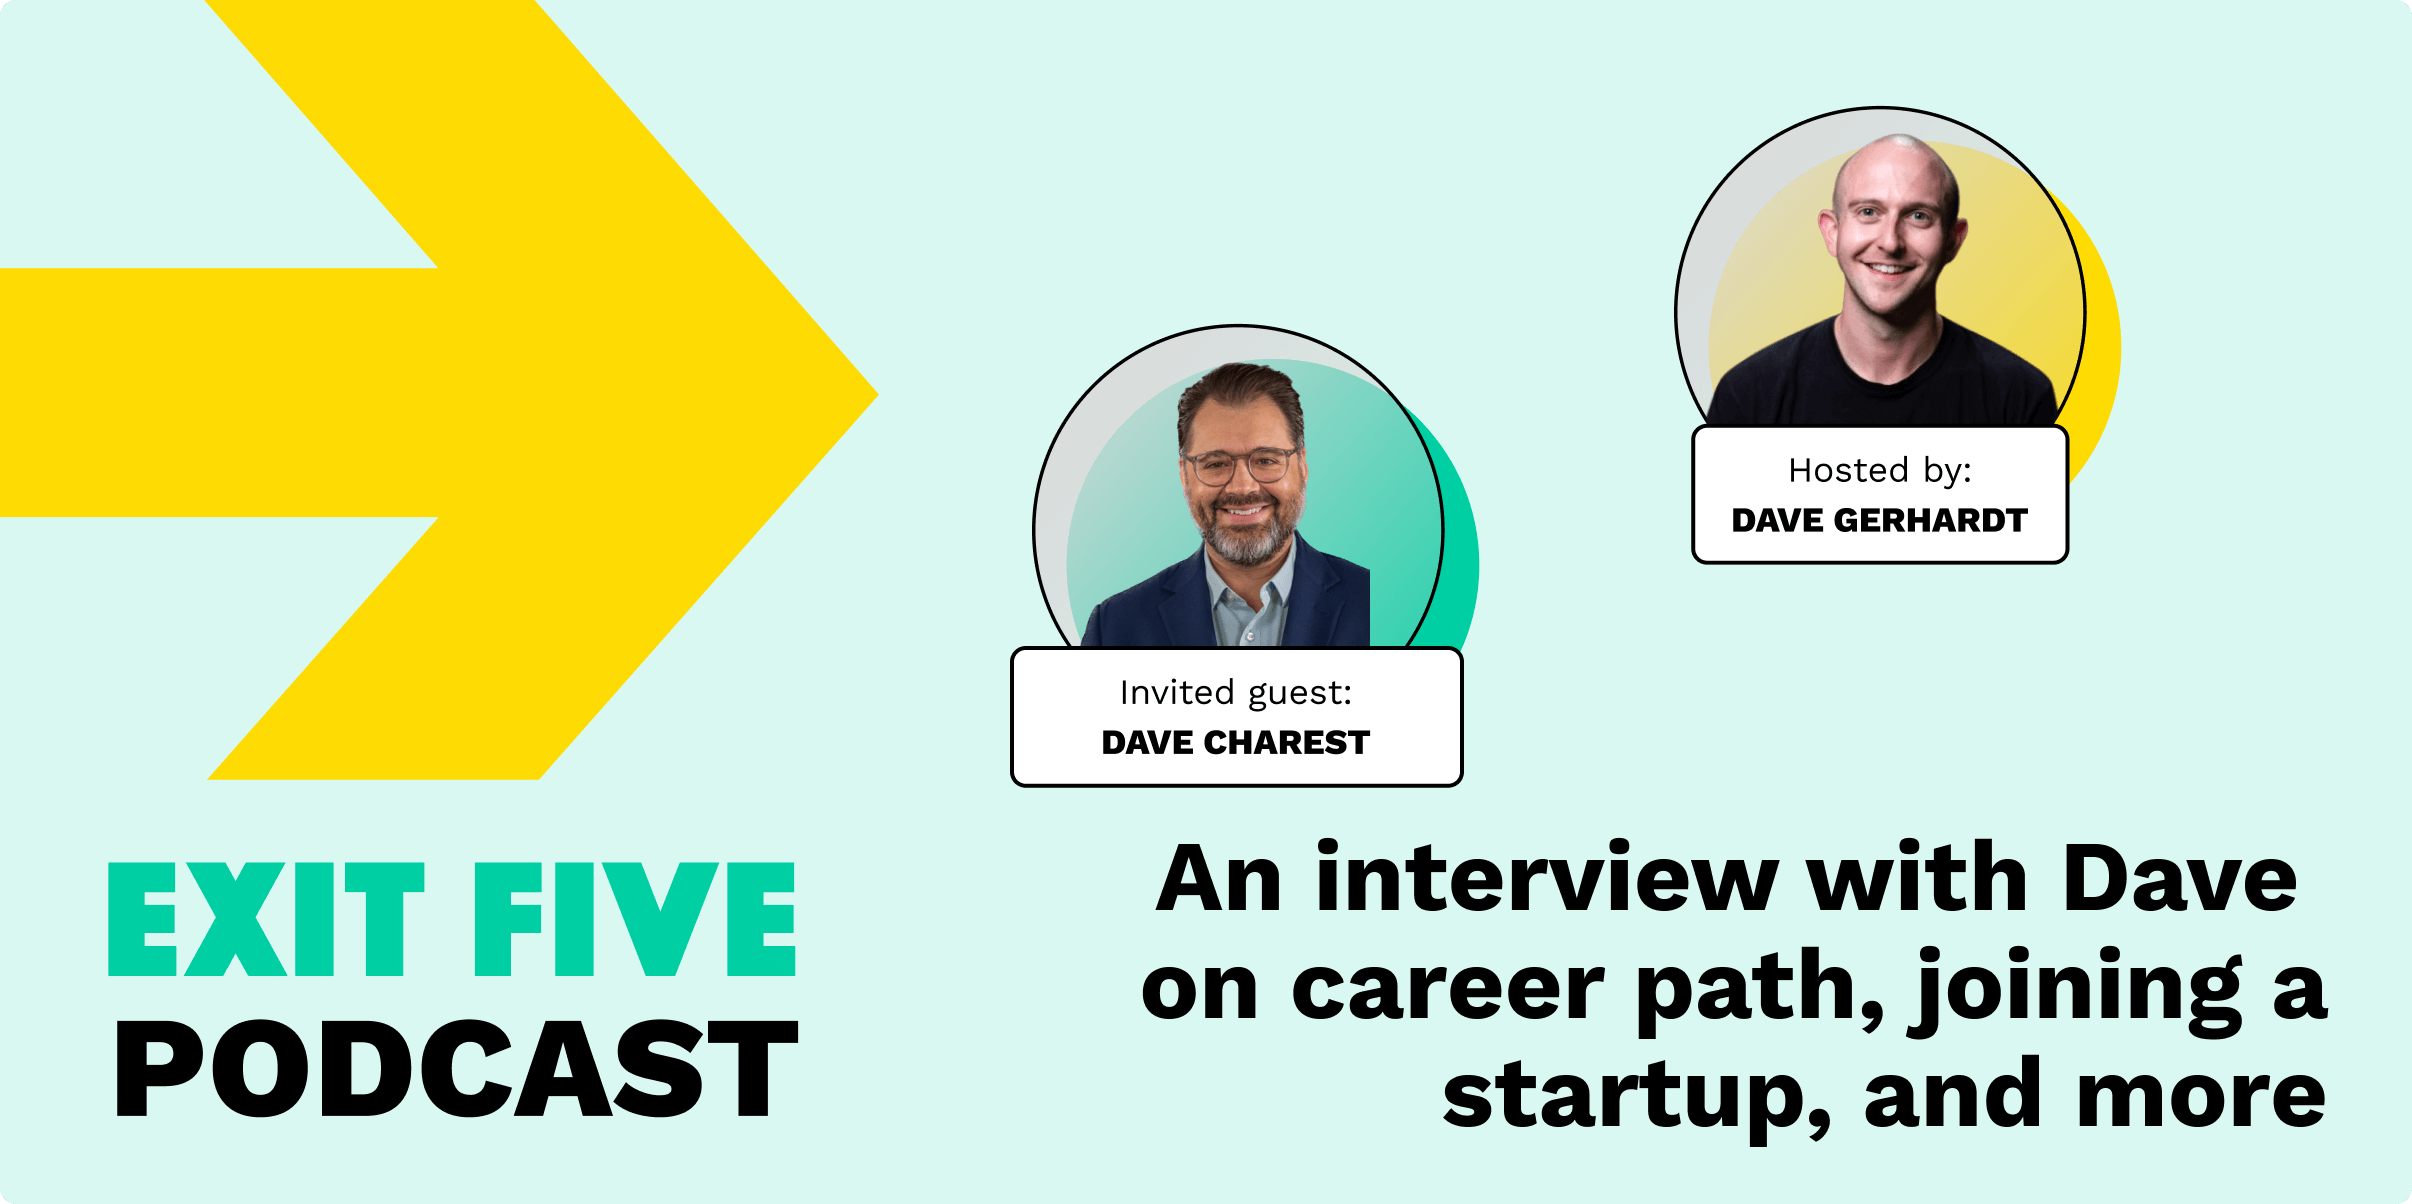 An interview with Dave on career path, joining a startup, and more